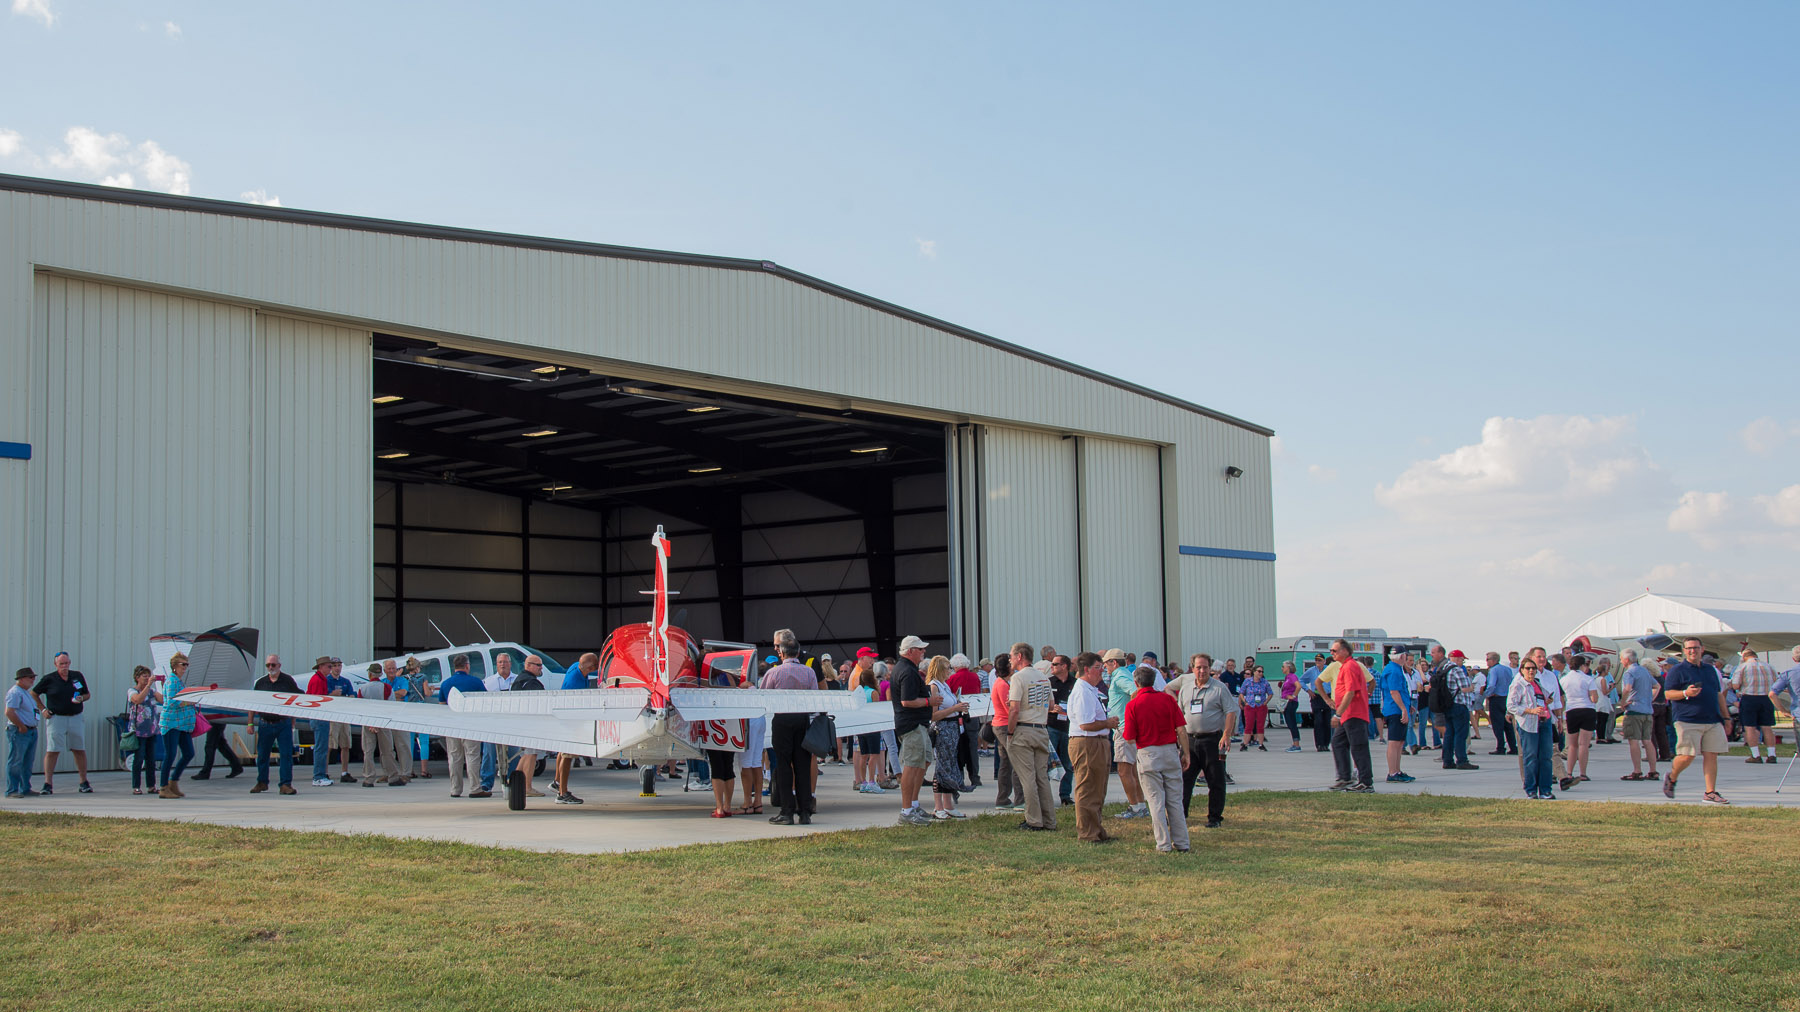 Some 800 American Bonanza Society members gathered at Col. James Jabara Airport in Wichita, Kansas, to celebrate the type club's fiftieth anniversary and the seventieth anniversary of the certification and first delivery of the acclaimed Beechcraft Bonanza. Photo courtesy of Visual Media Group.